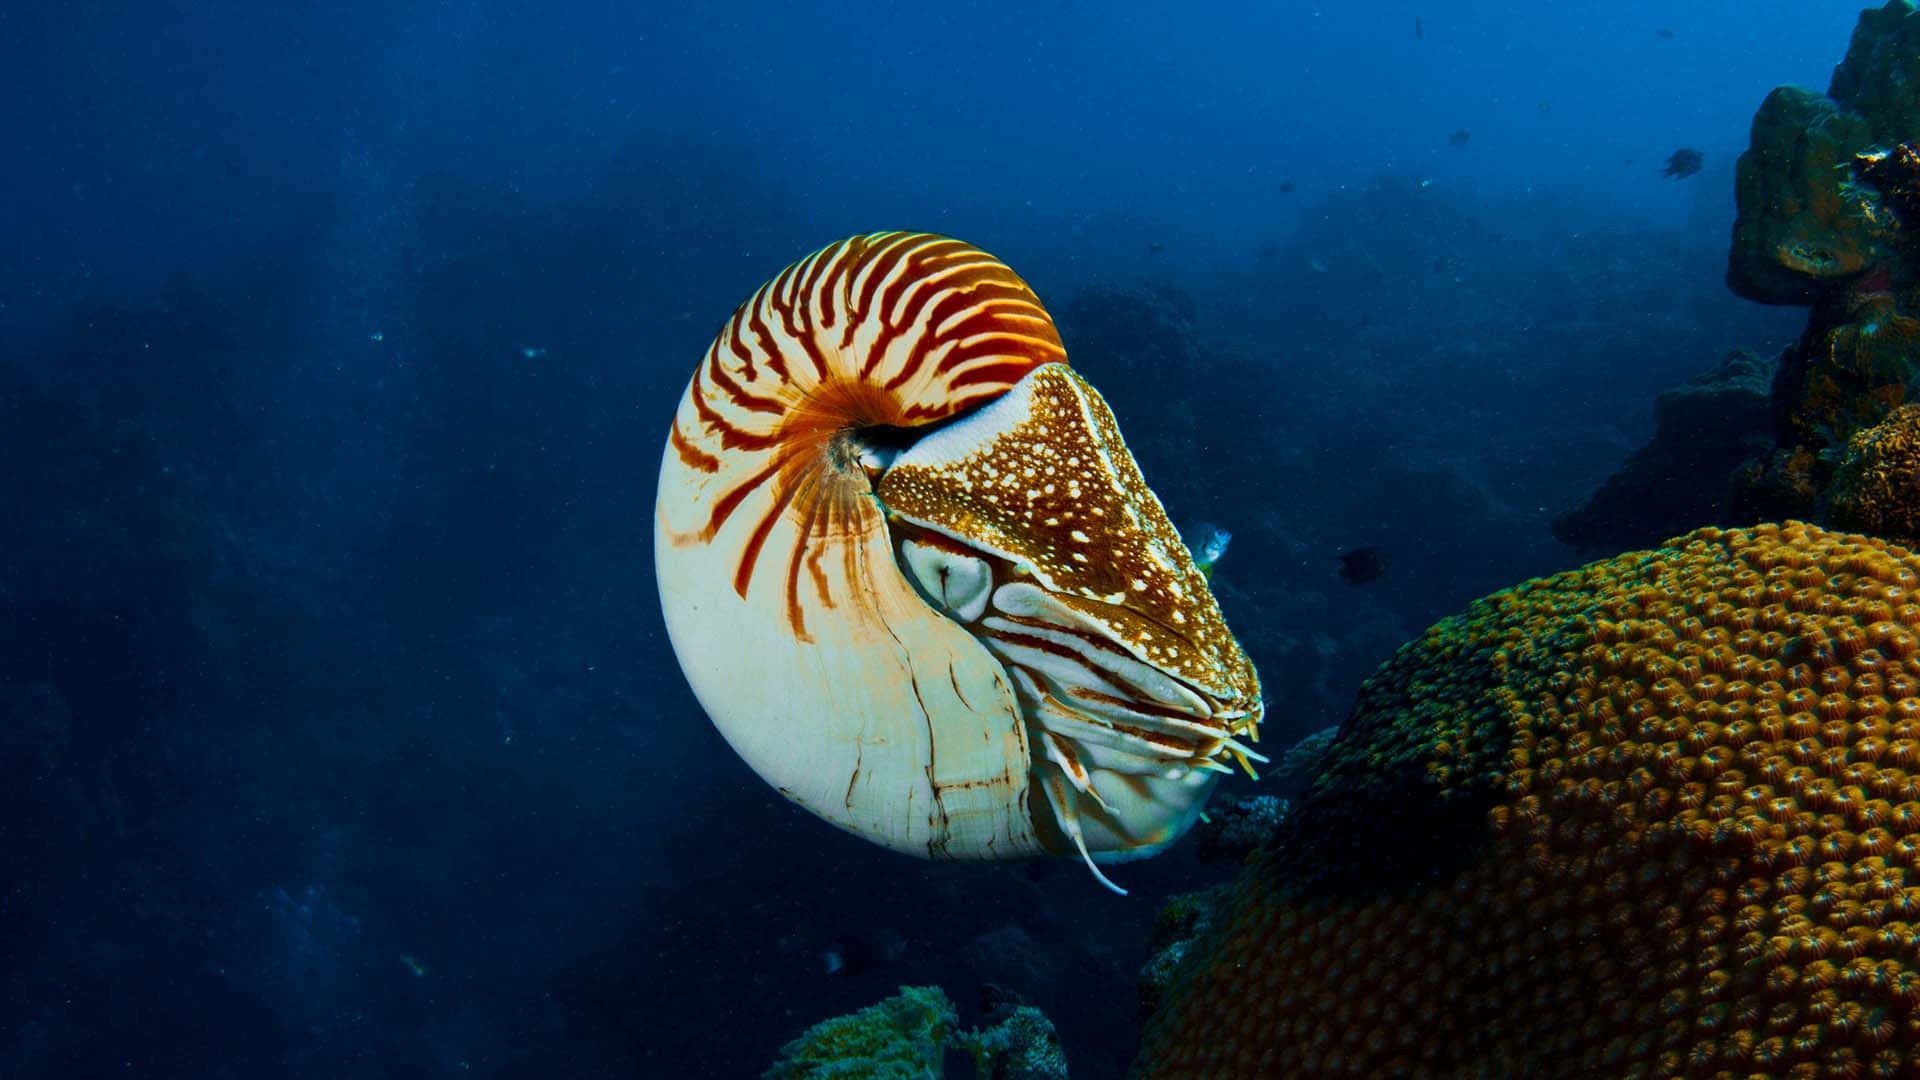 Magnificent View Of Underwater Life With A Nautilus Wallpaper